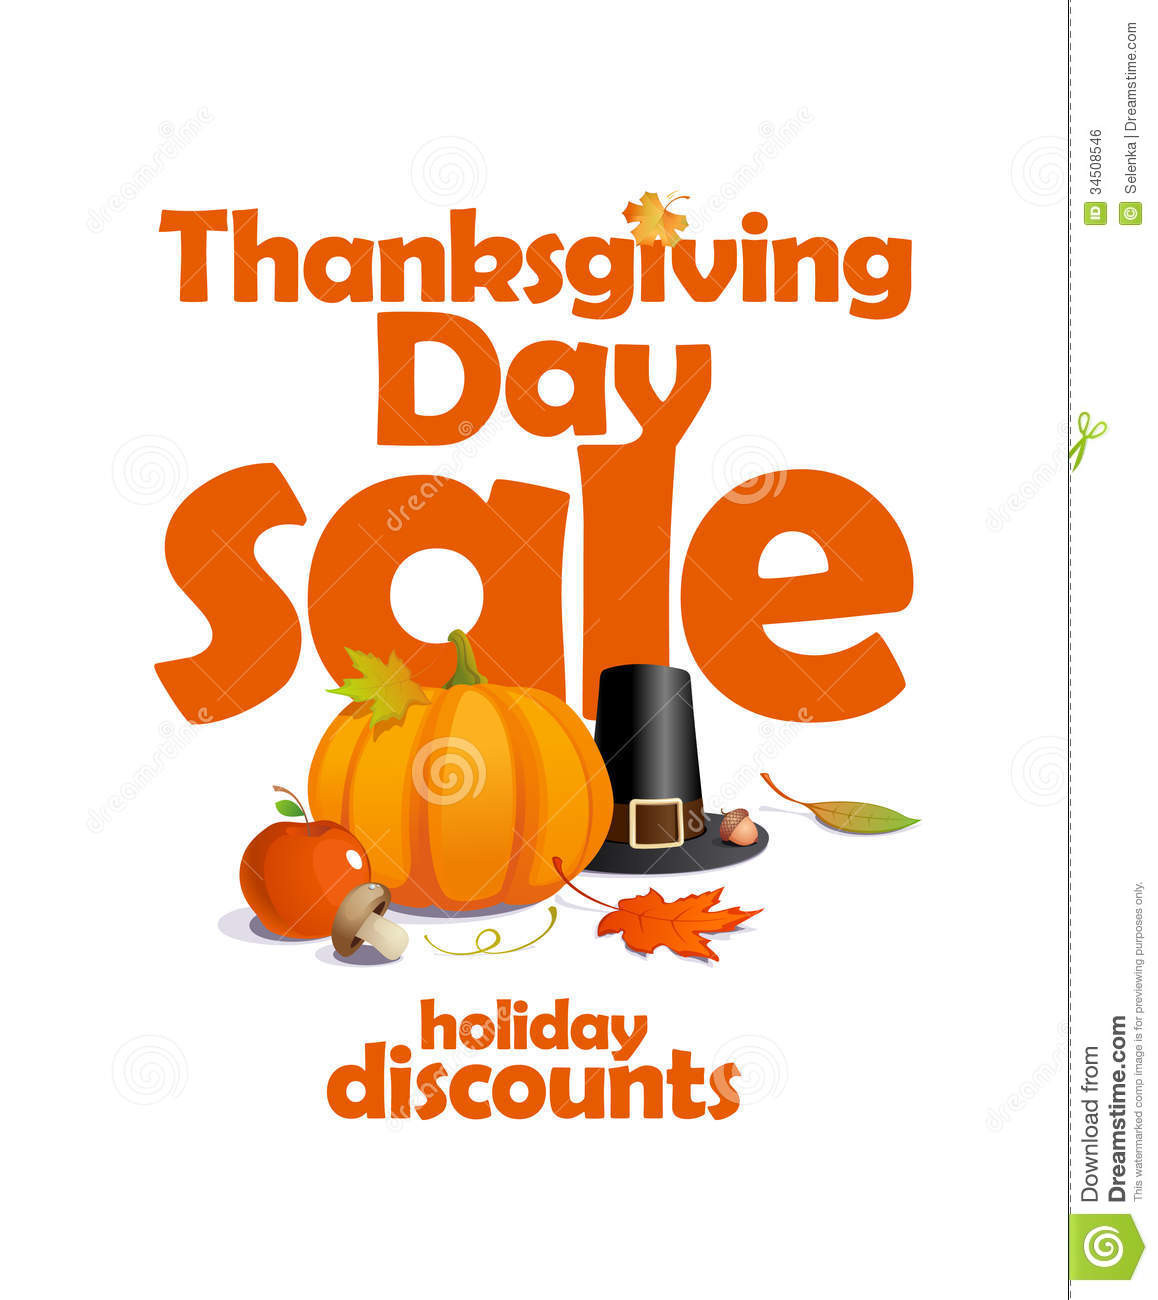 Turkey Sale For Thanksgiving
 Thanksgiving Day Sale Design Stock Vector Image